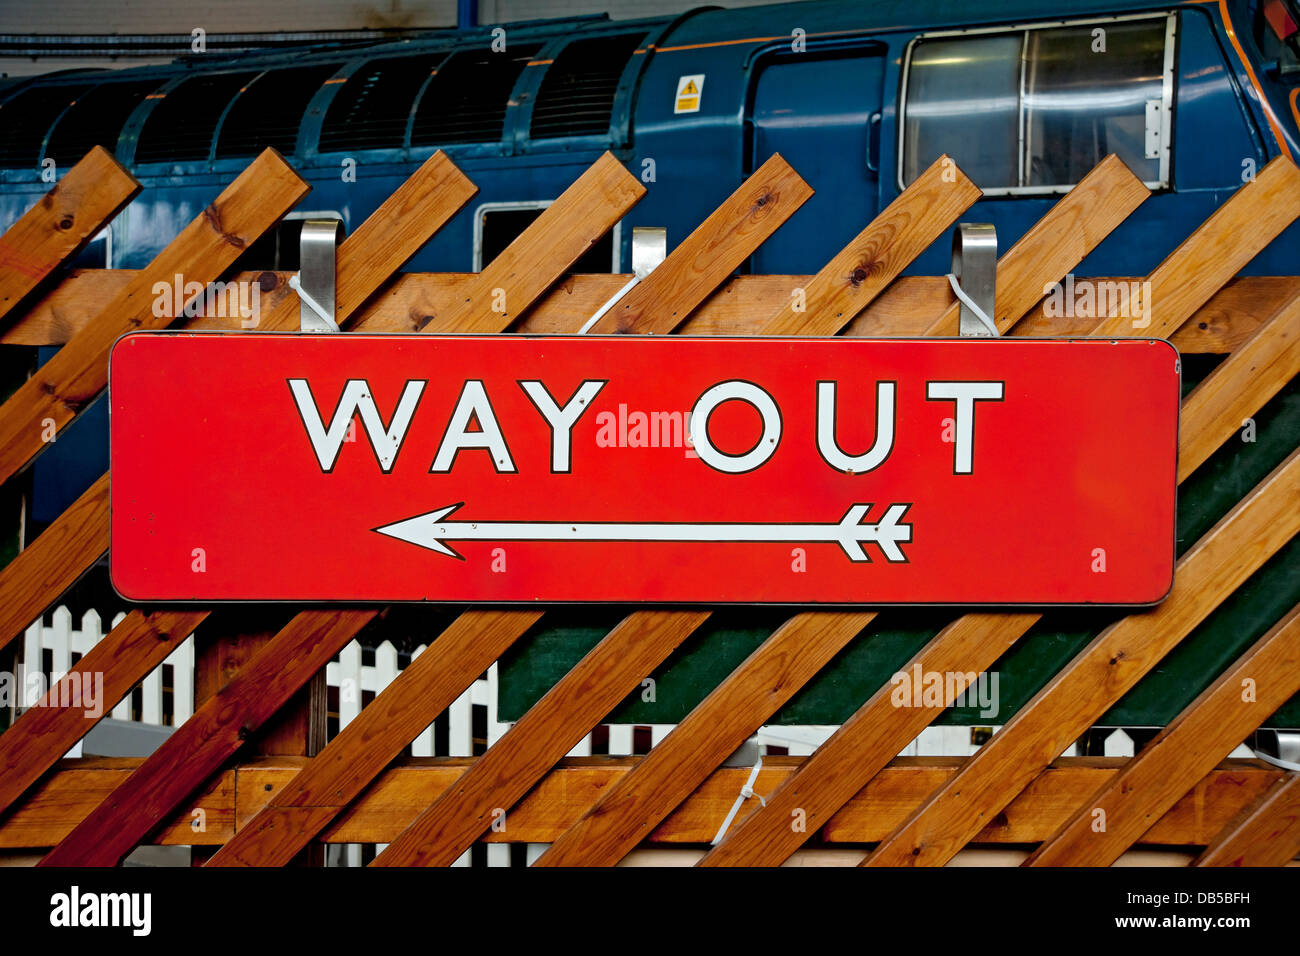 Close up of old railway station train platform sign 'Way out' exit signage England UK United Kingdom GB Great Britain Stock Photo